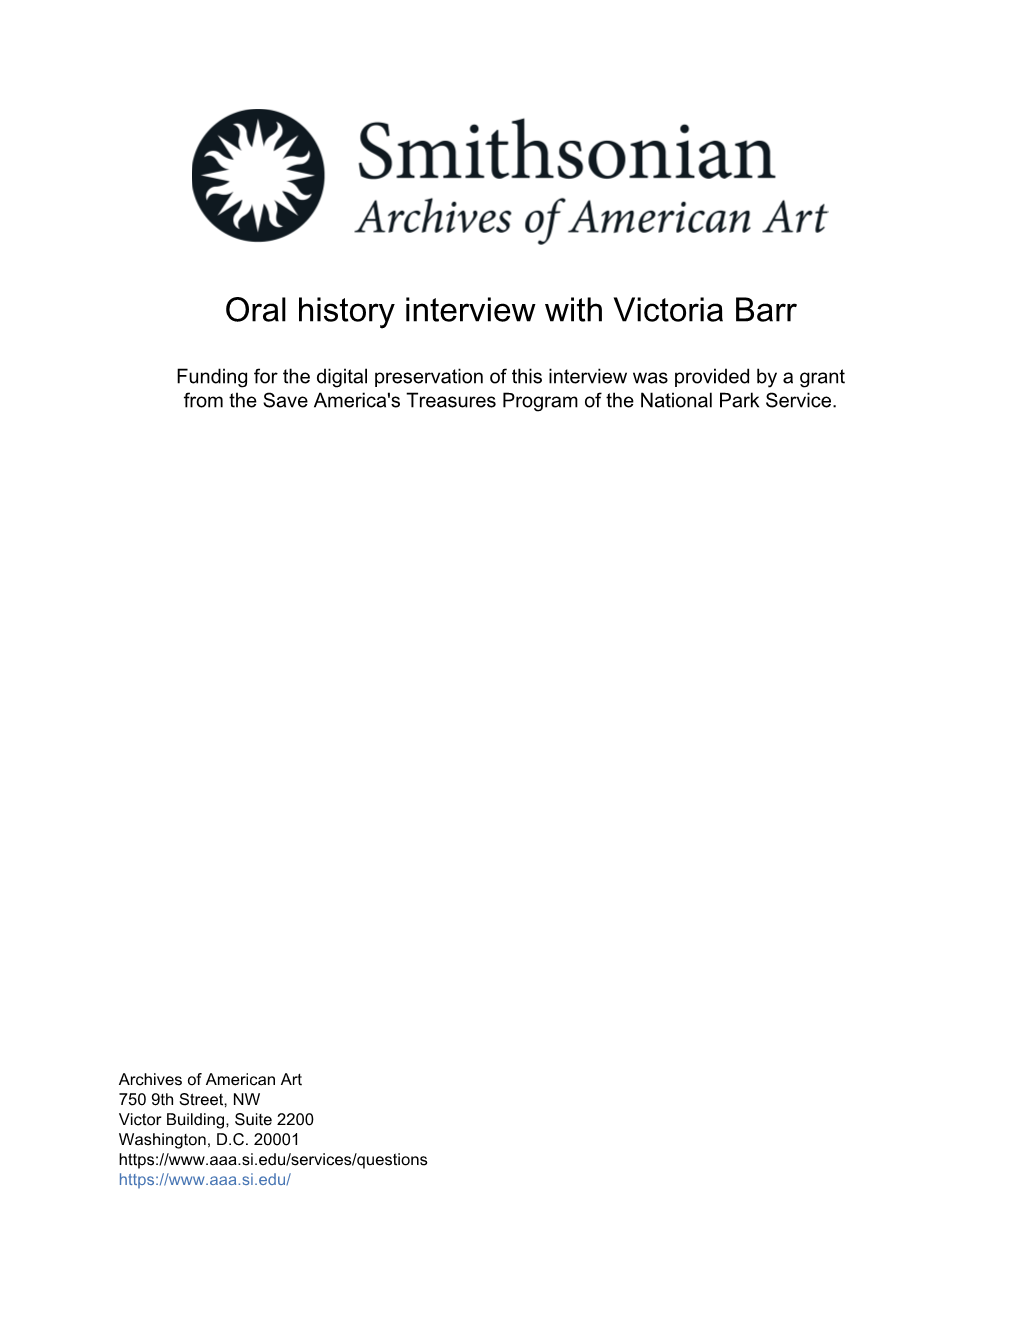 Oral History Interview with Victoria Barr